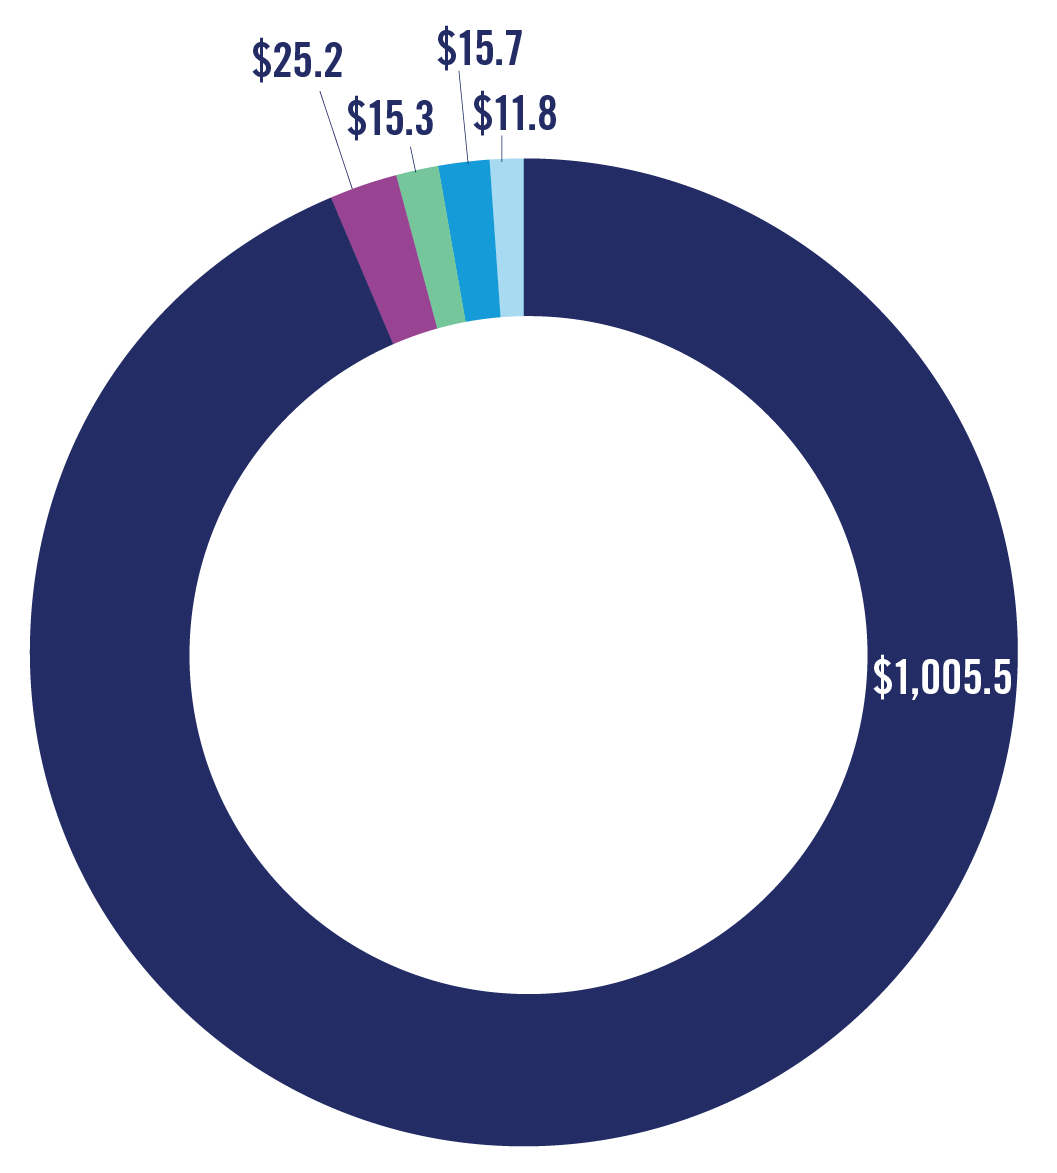 pie chart showing sources of revenue. Pie pieces are labeled: $1,005.5, 25.2, 15.3, 15.7, 11.8